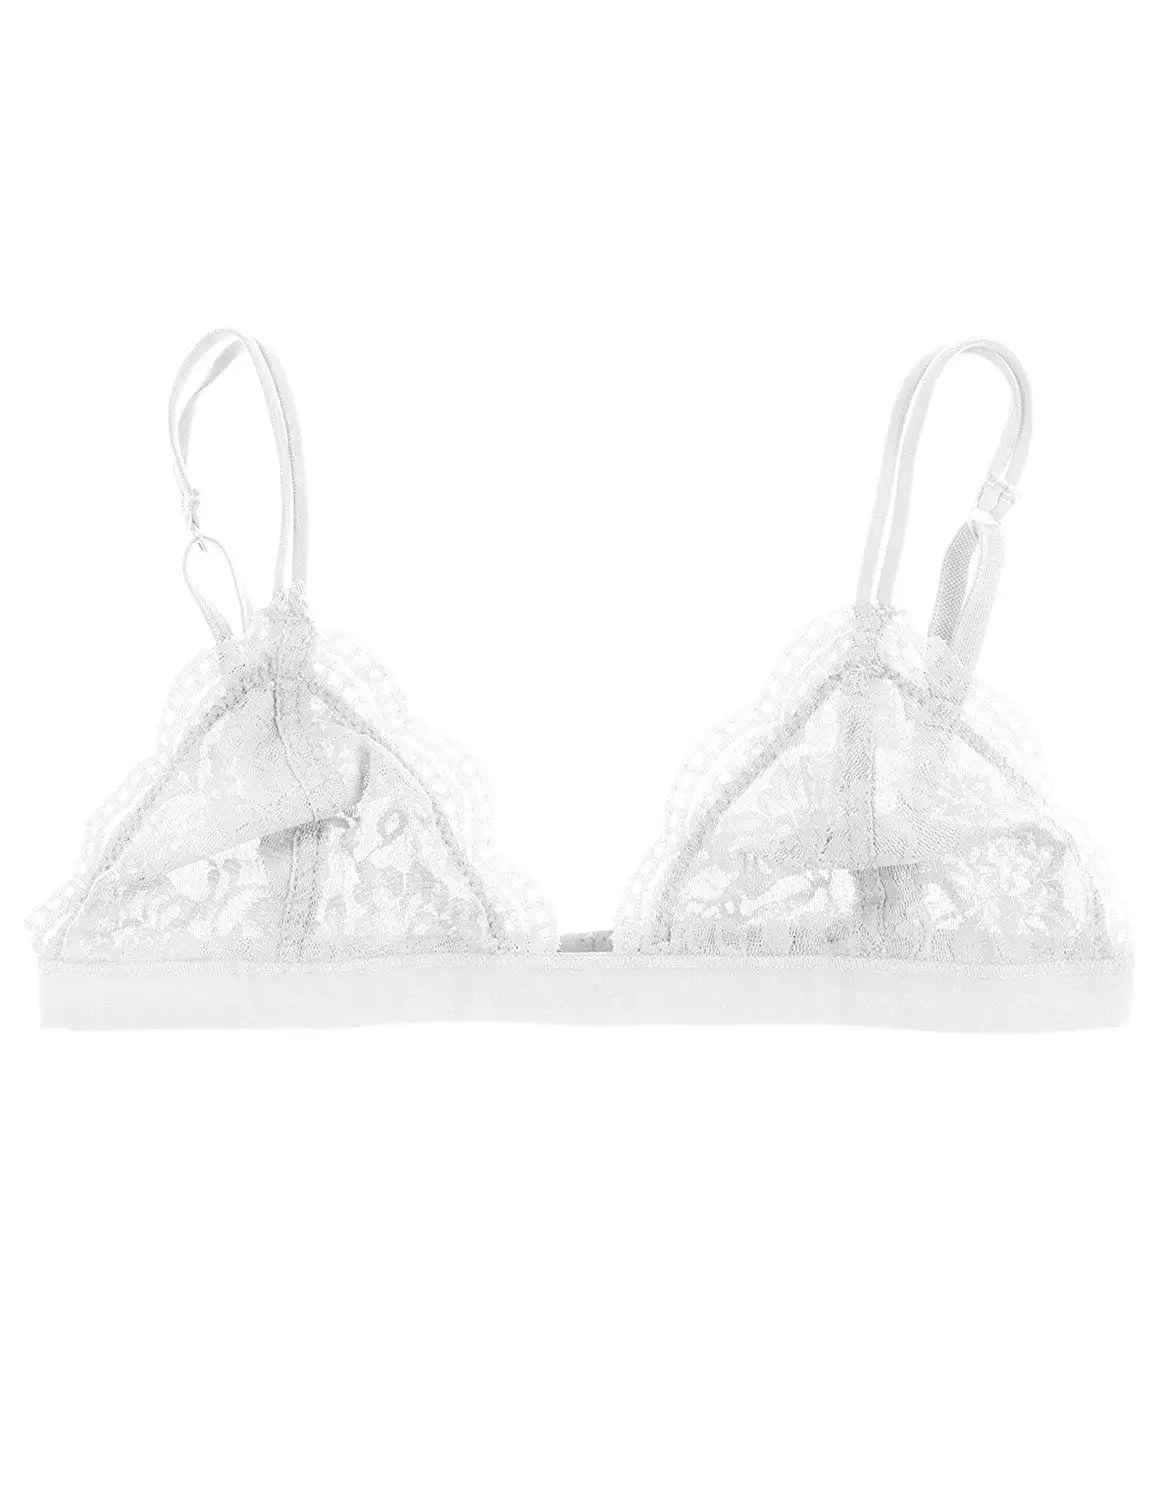 Buy Stunning White Floral Lace Bra With Cut Out Loop and Beautiful